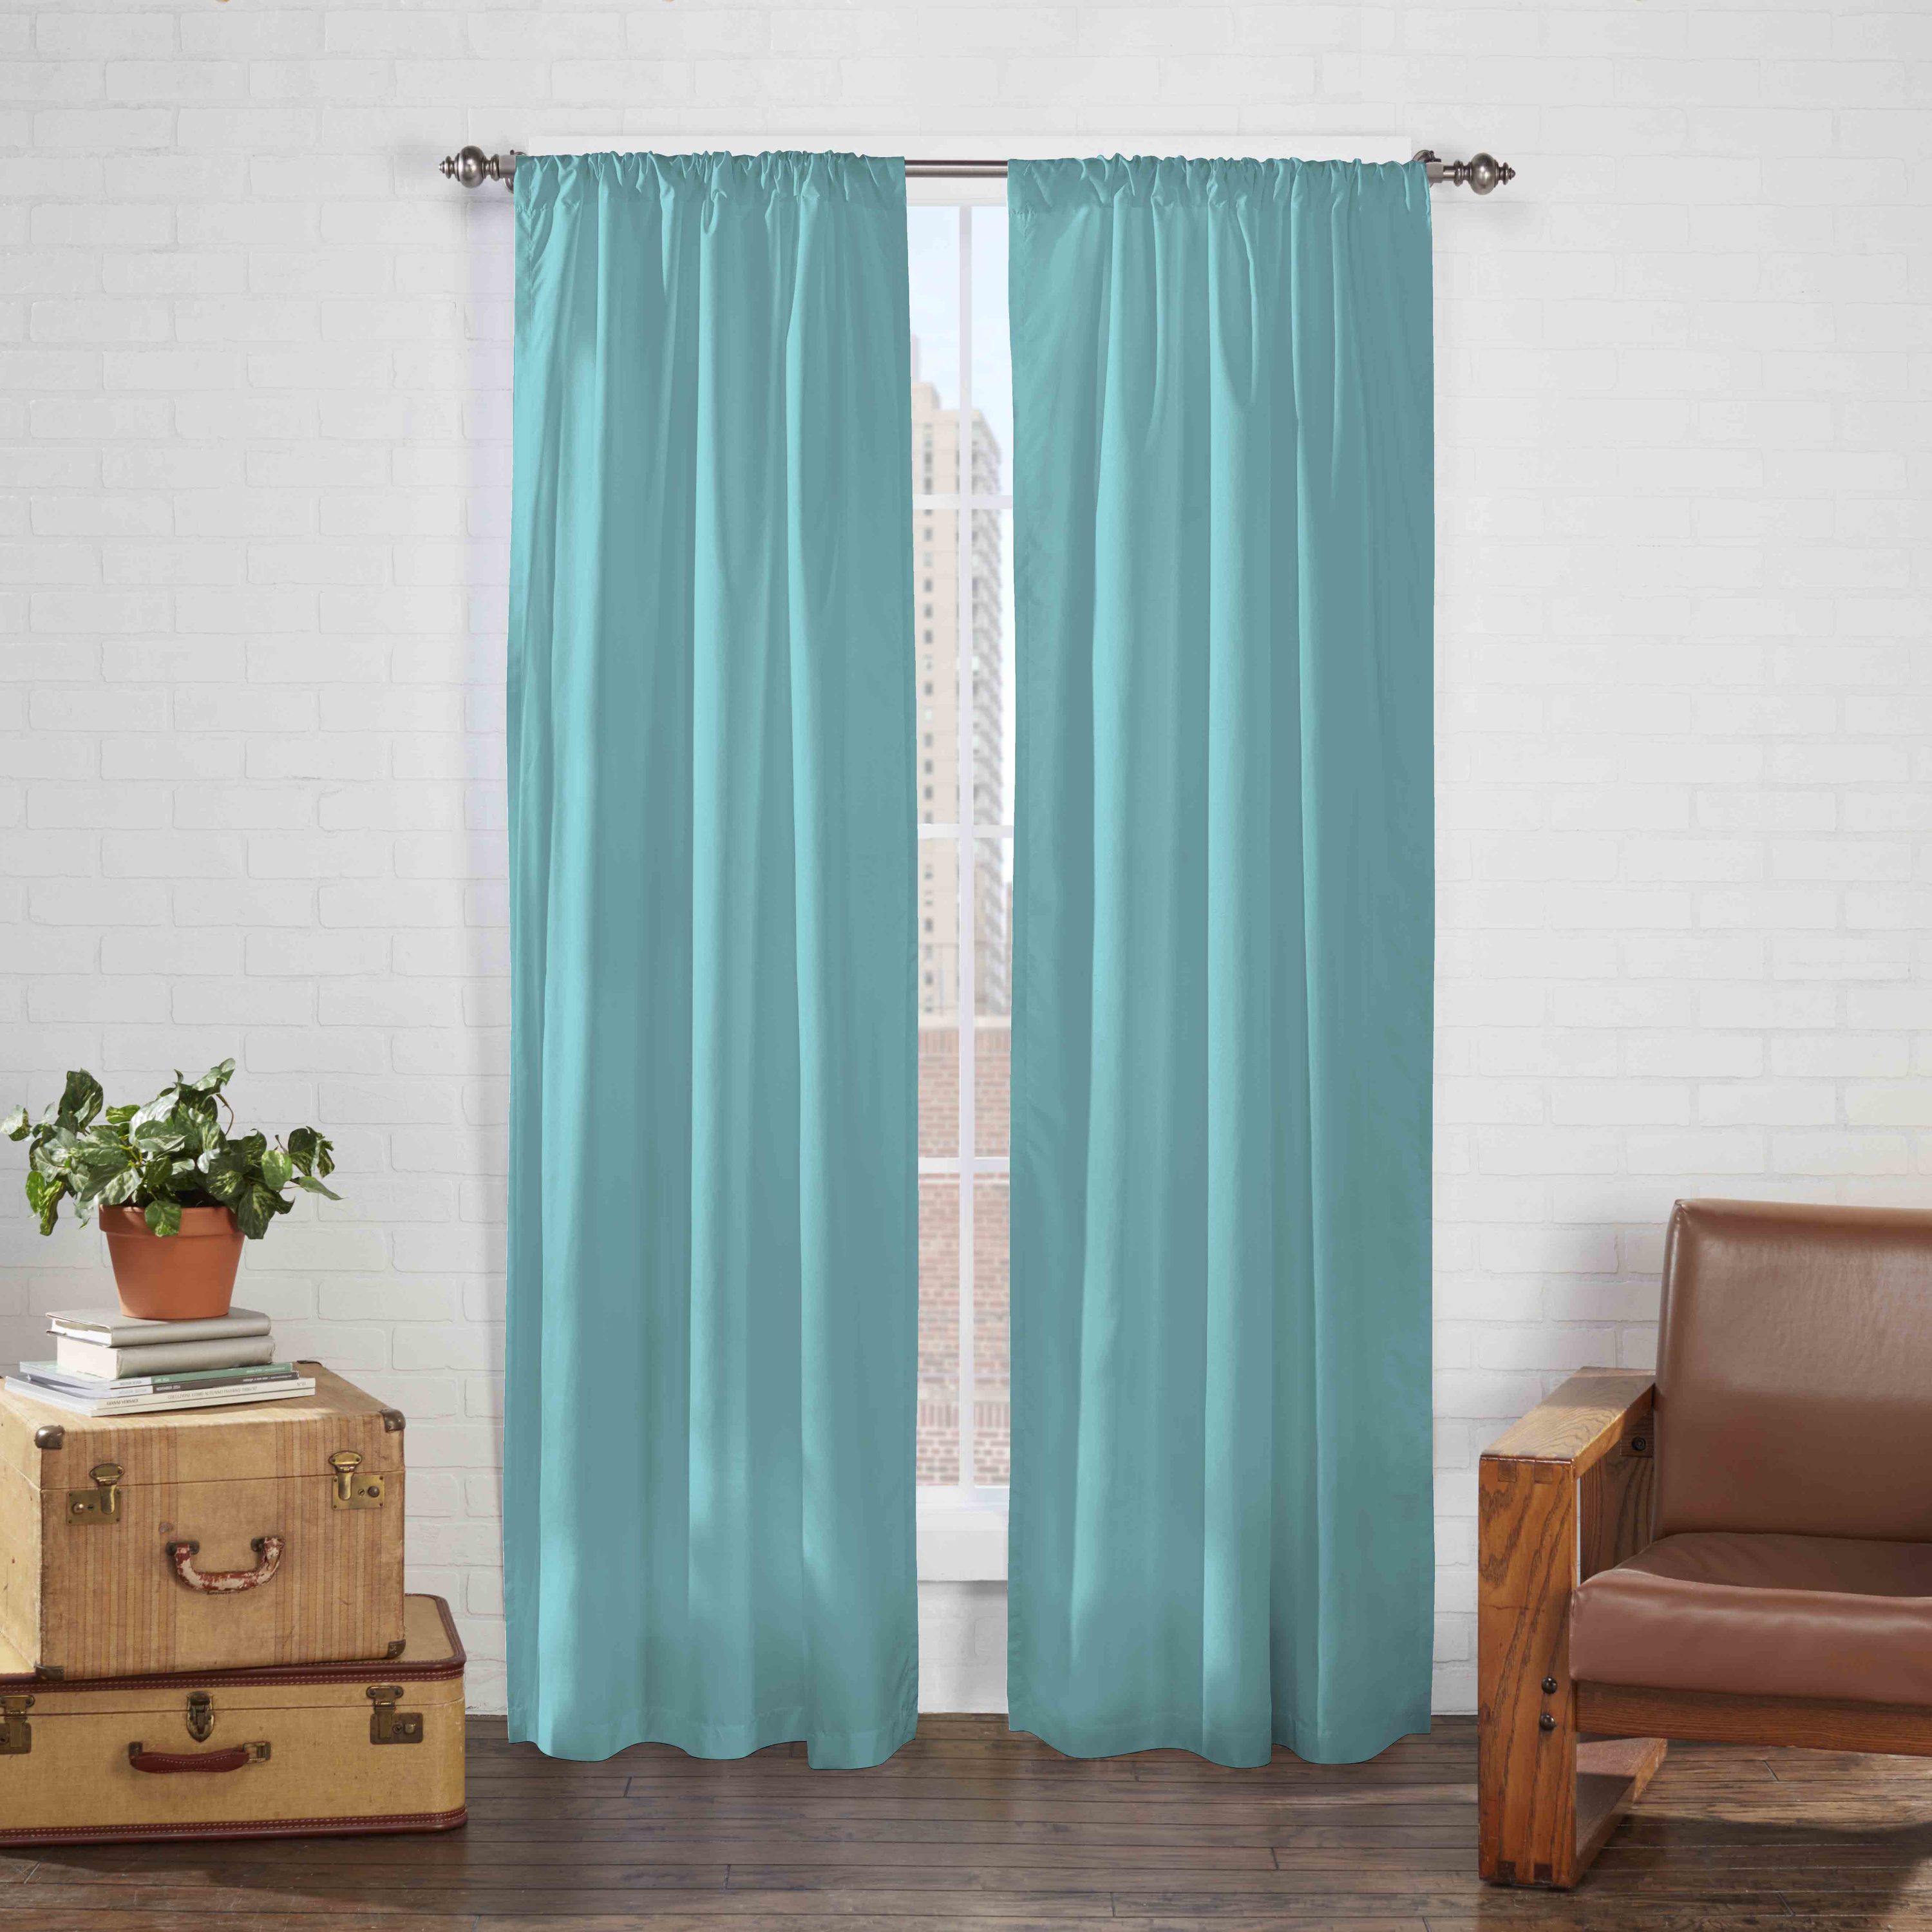 Pairs To Go 63-in Polyester Light Filtering Rod Curtain Panel Pair in the Curtains & Drapes department at Lowes.com